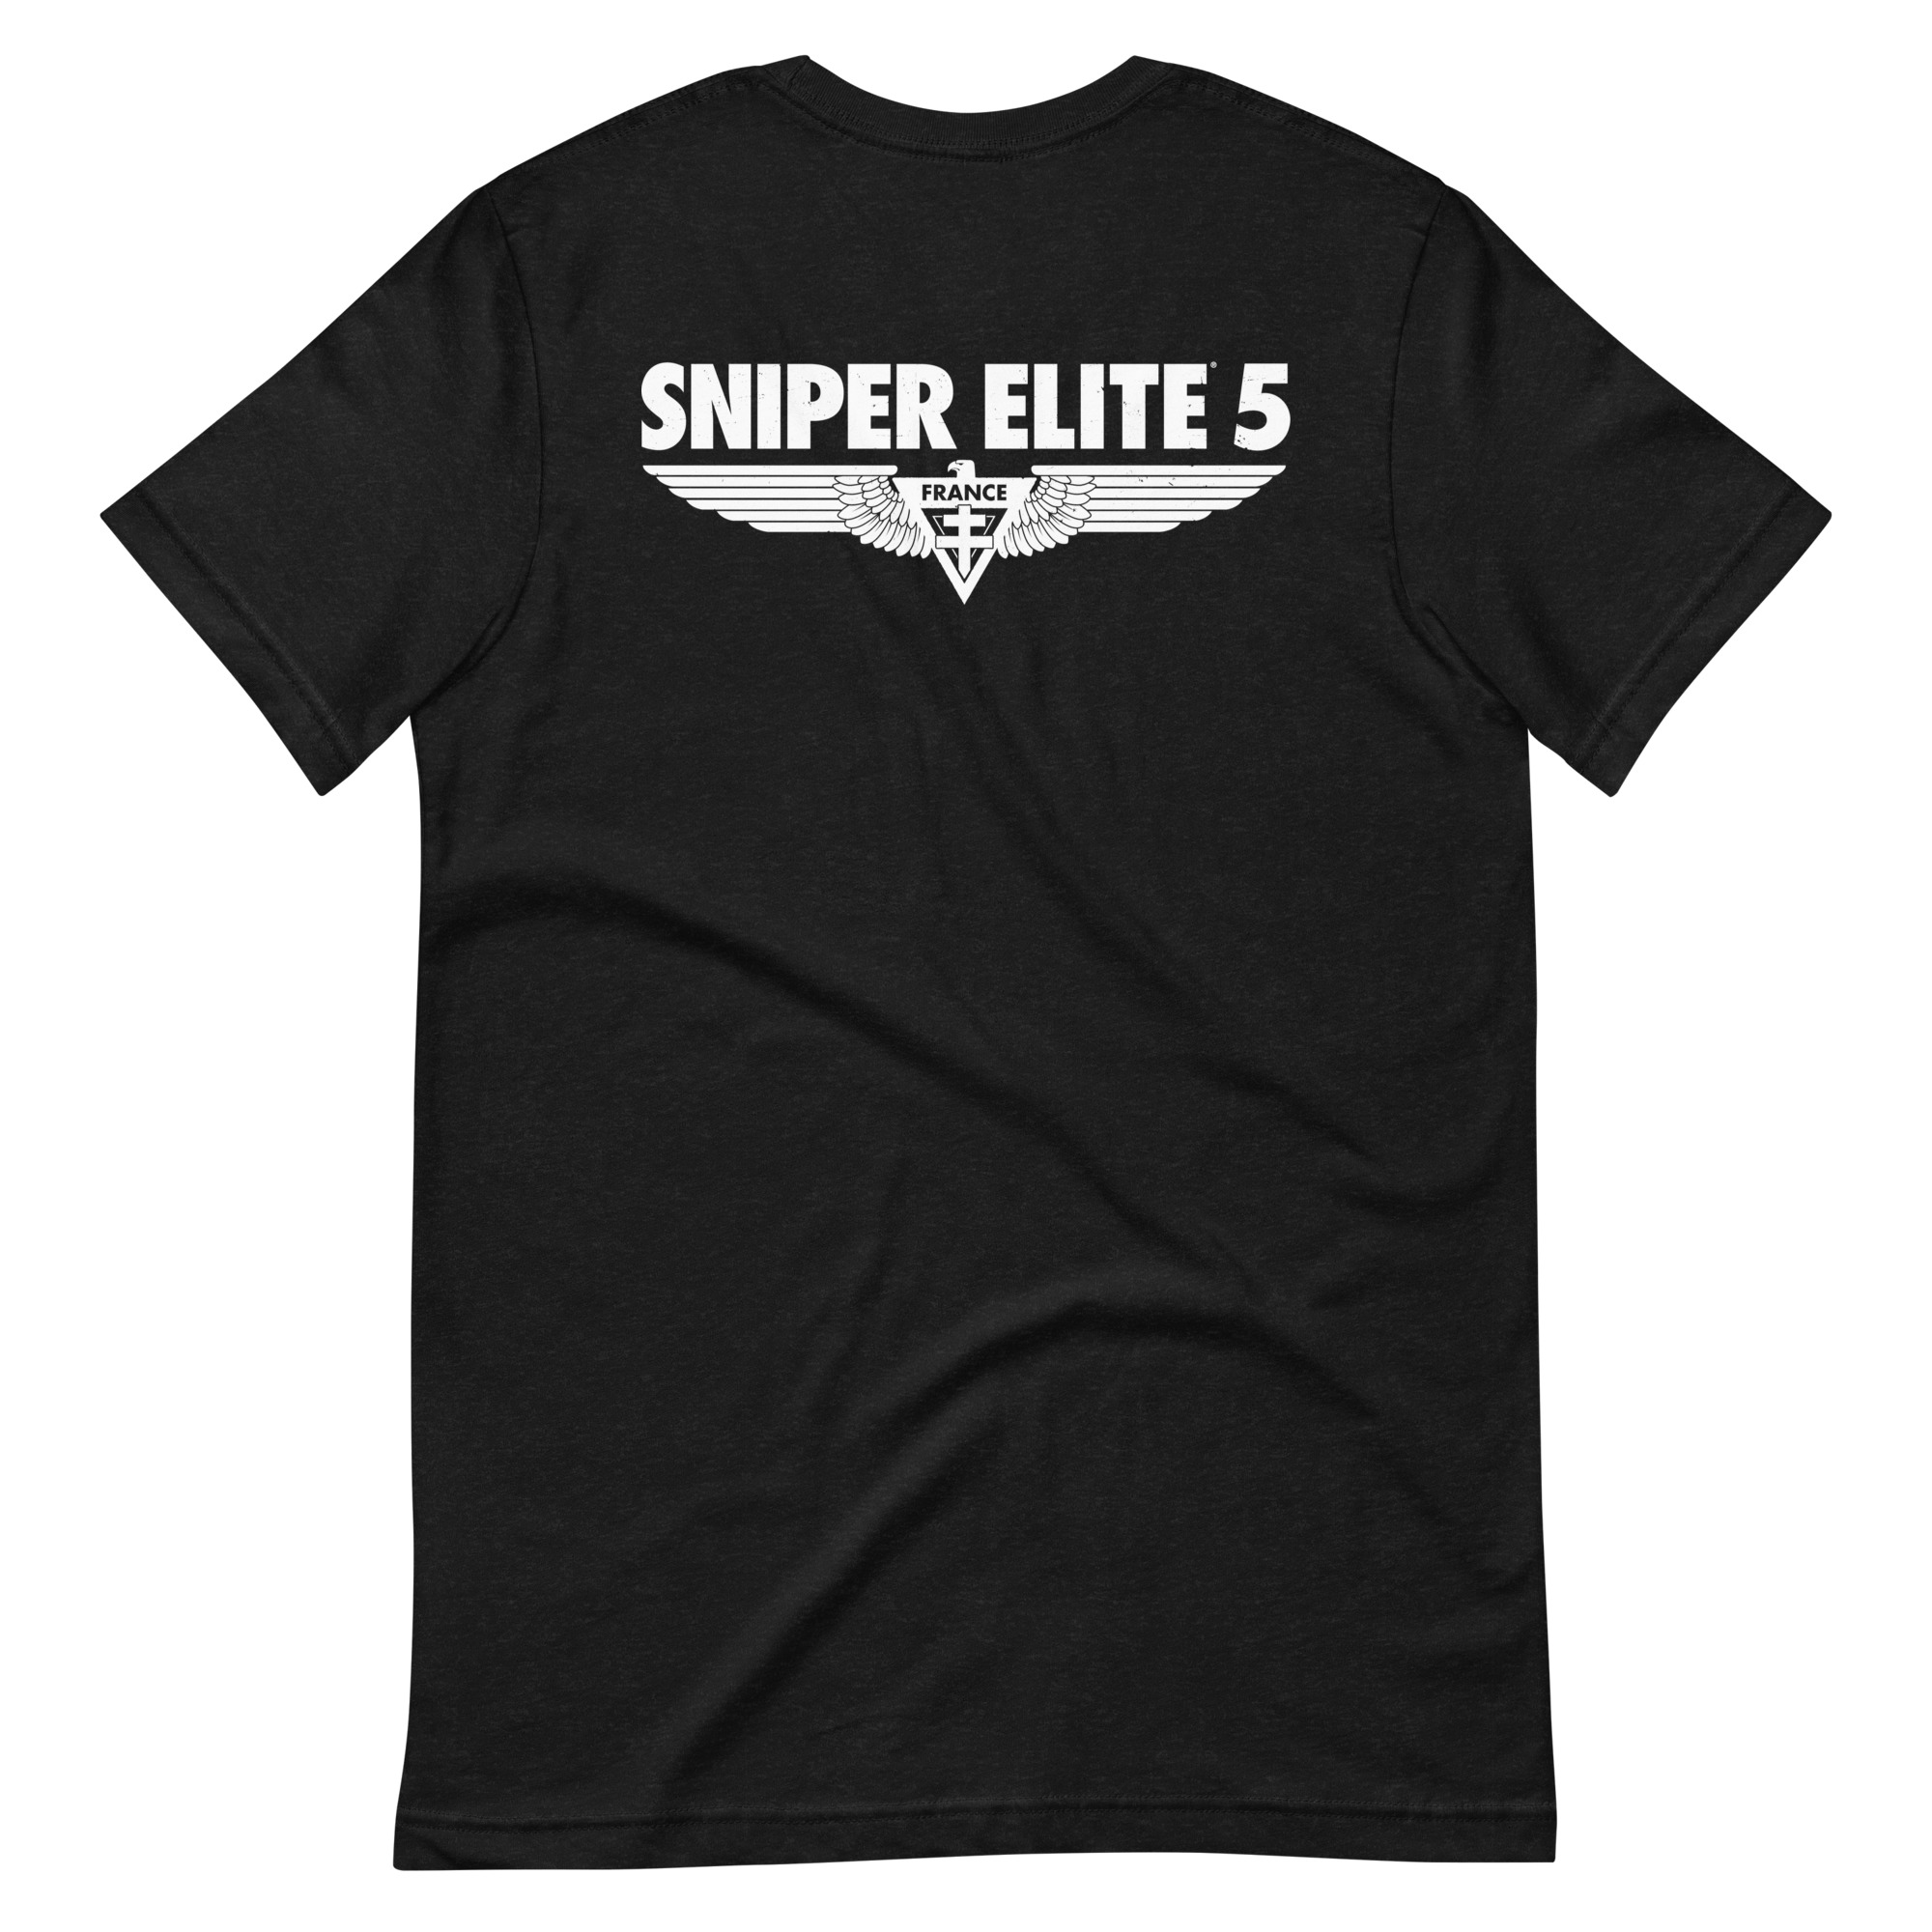 Image of a black coloured Sniper Elite 5 t-shirt featuring a large Sniper elite 5 logo in the middle